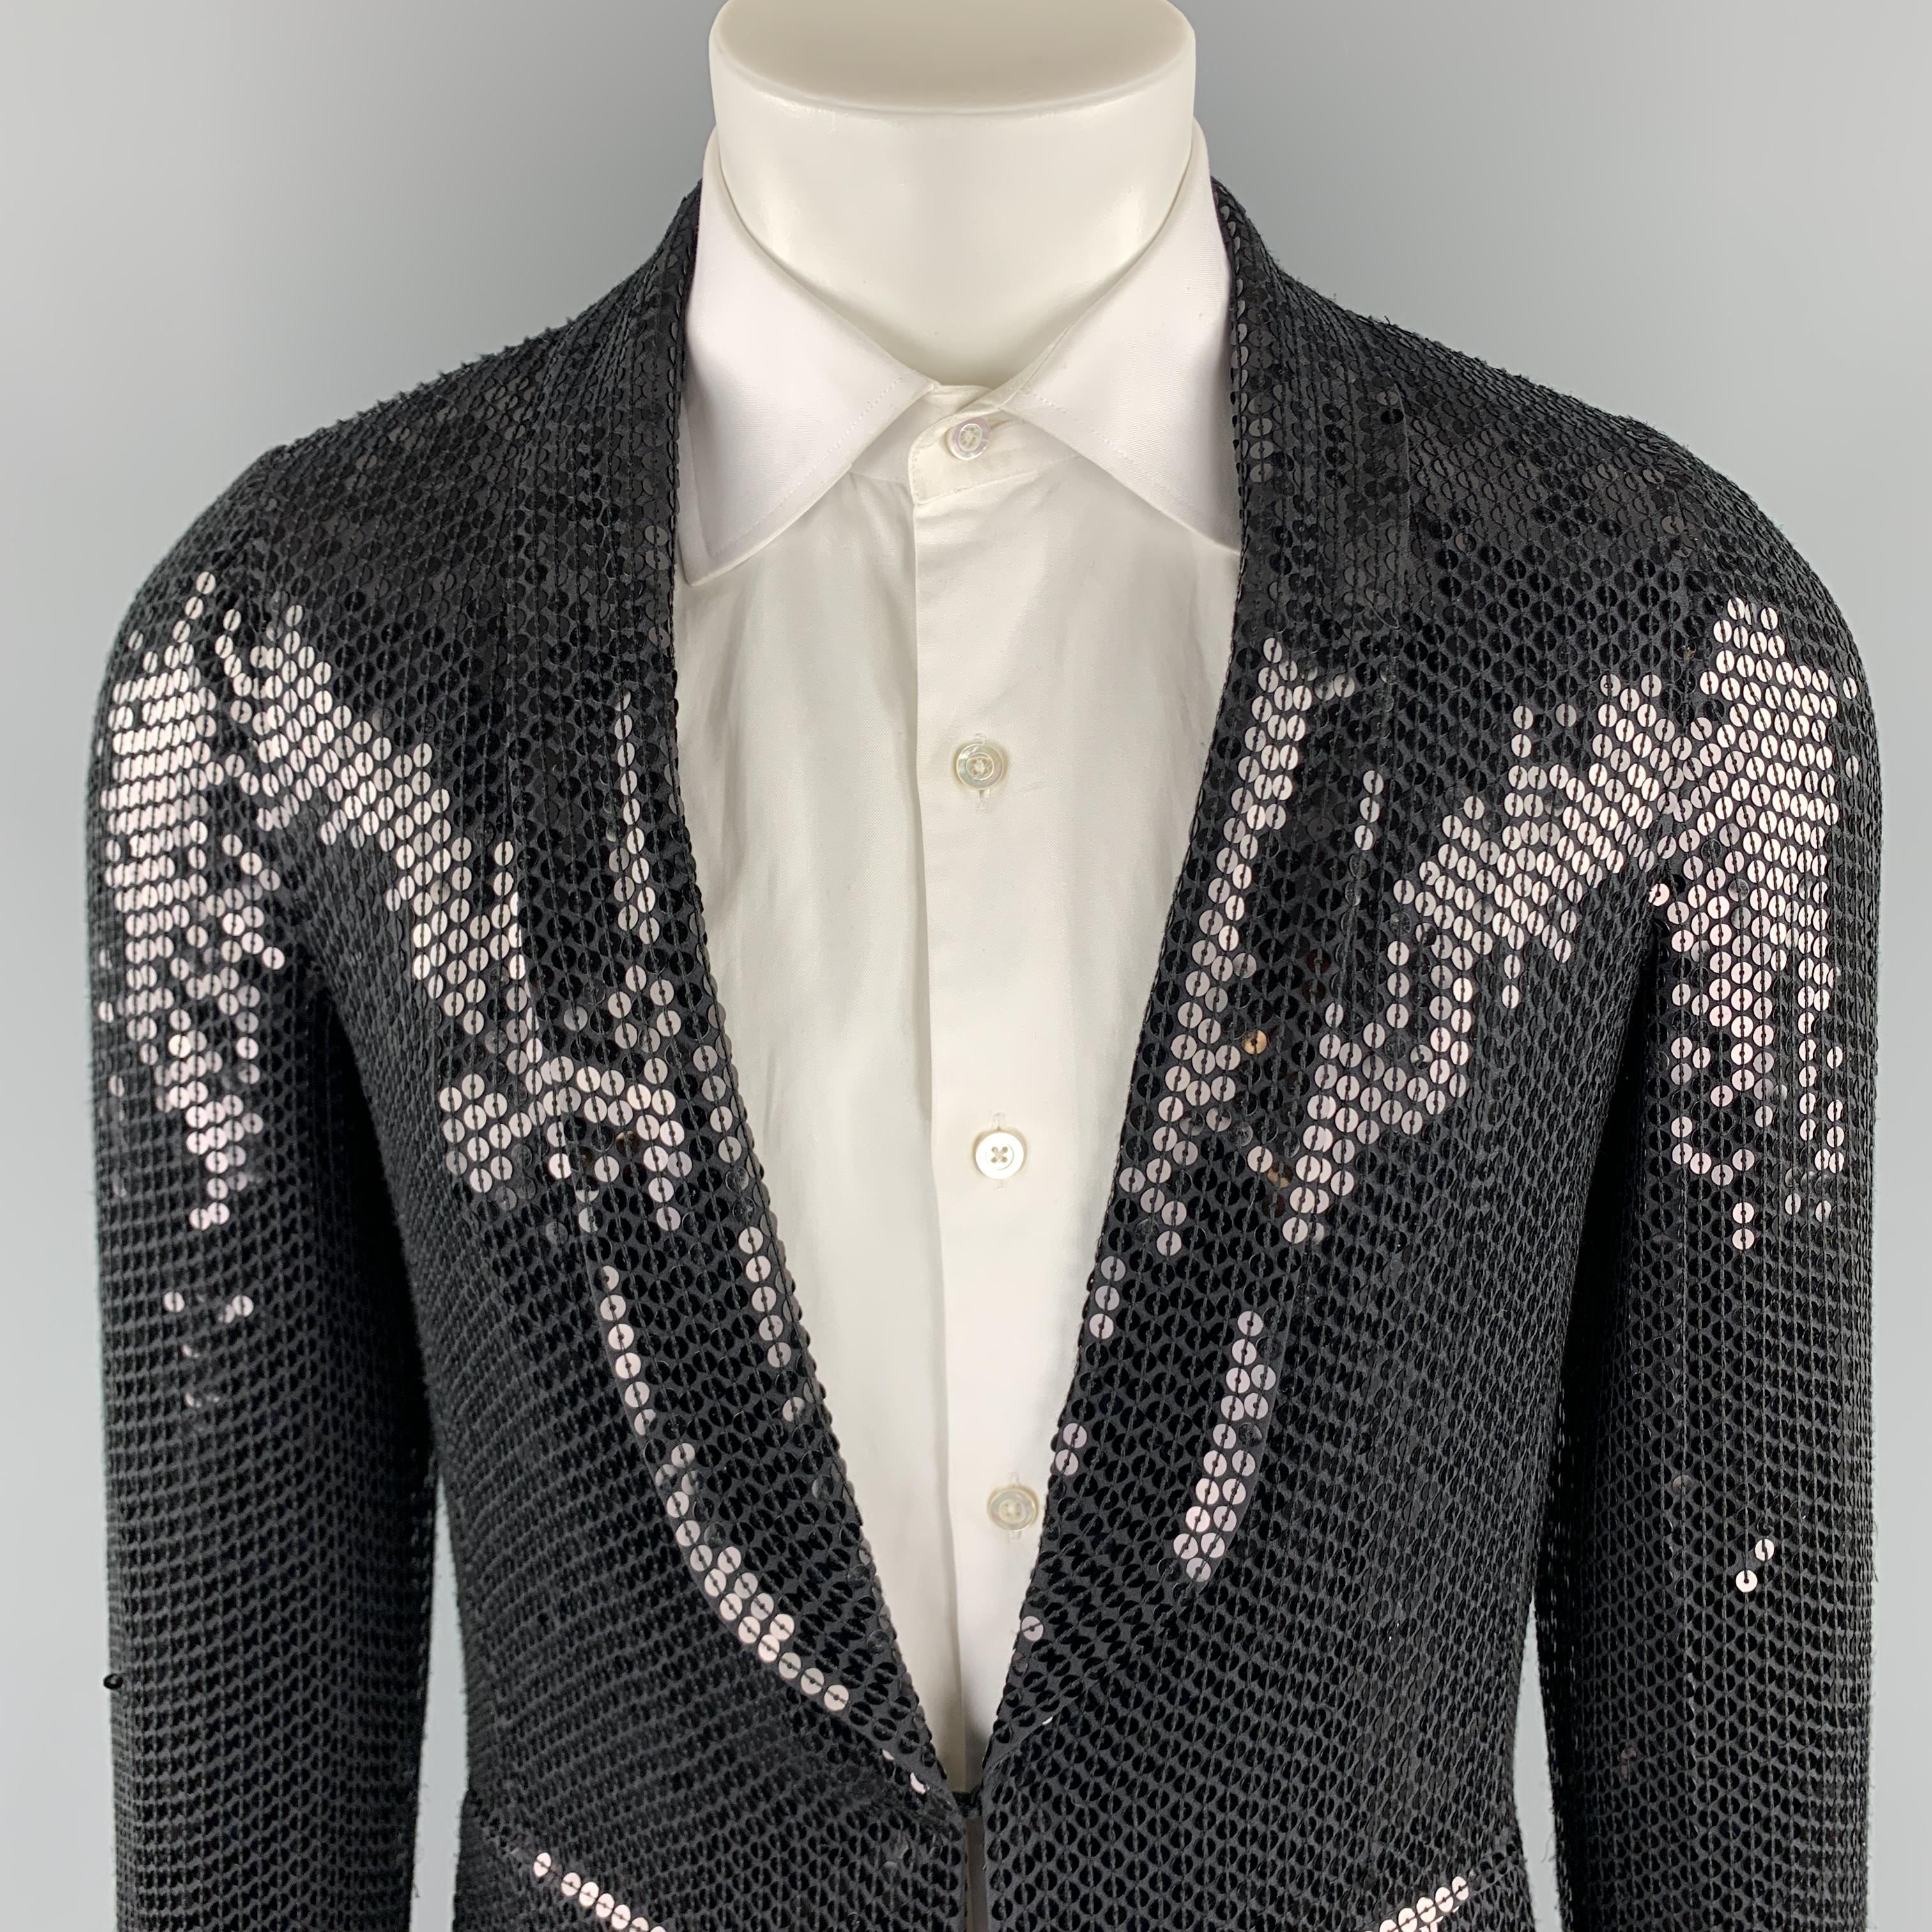 CUSTOM MADE sport coat comes in a black sequined silk material, featuring a shawl collar, a hook and eye at closure, flap pockets, single breasted, and unbuttoned cuffs. As is. 

Excellent Pre-Owned Condition.
Marked: no